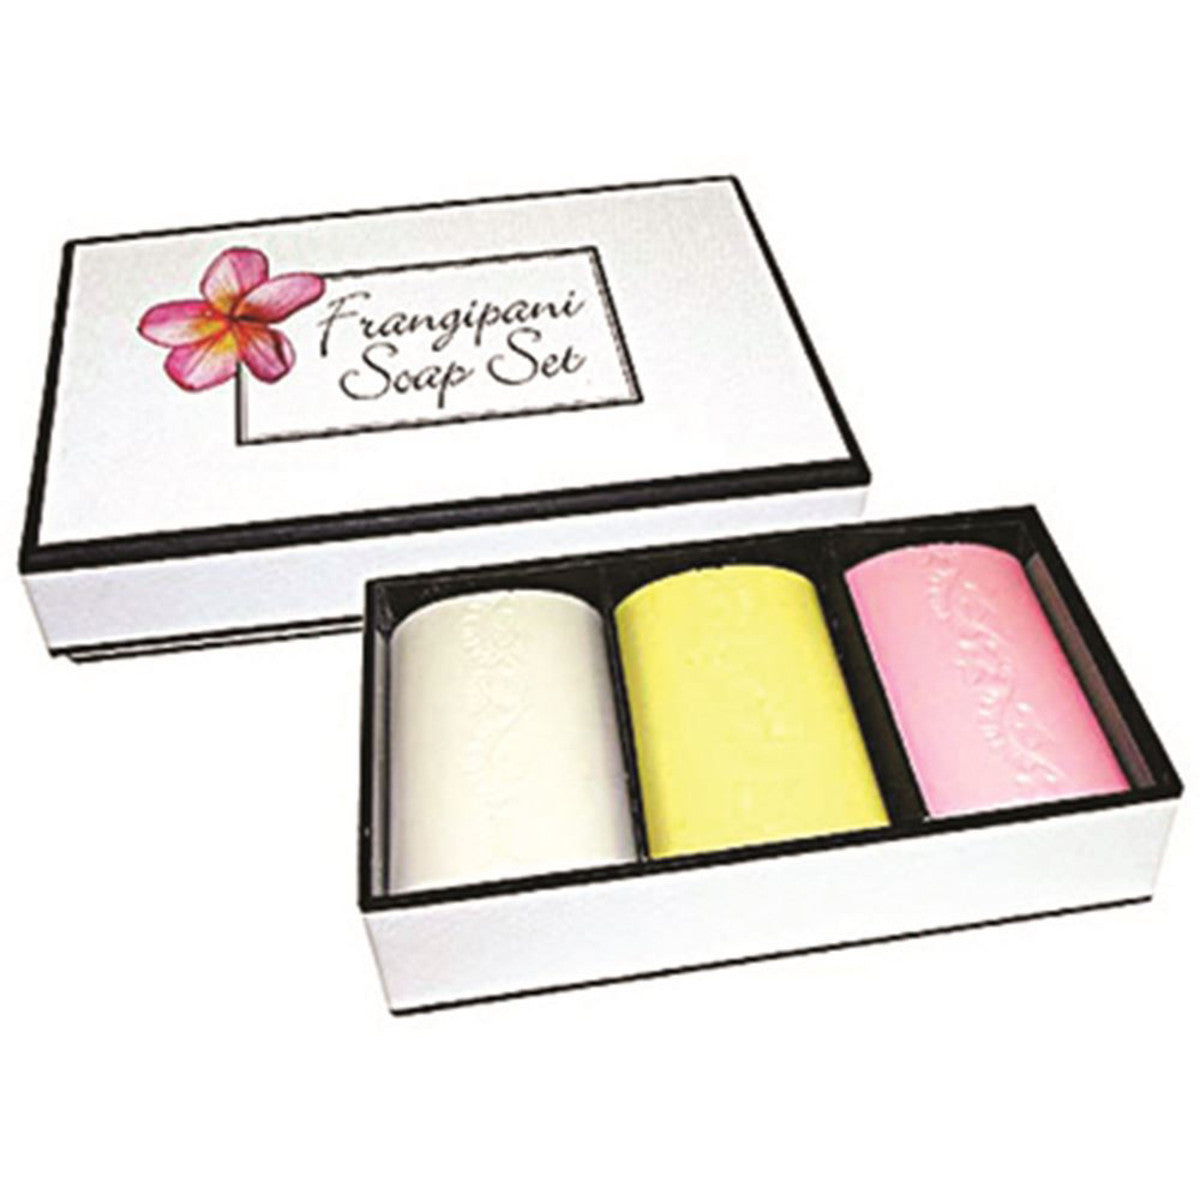 Clover Fields - Frangipani Soap Boxed 100g x 3 Pack